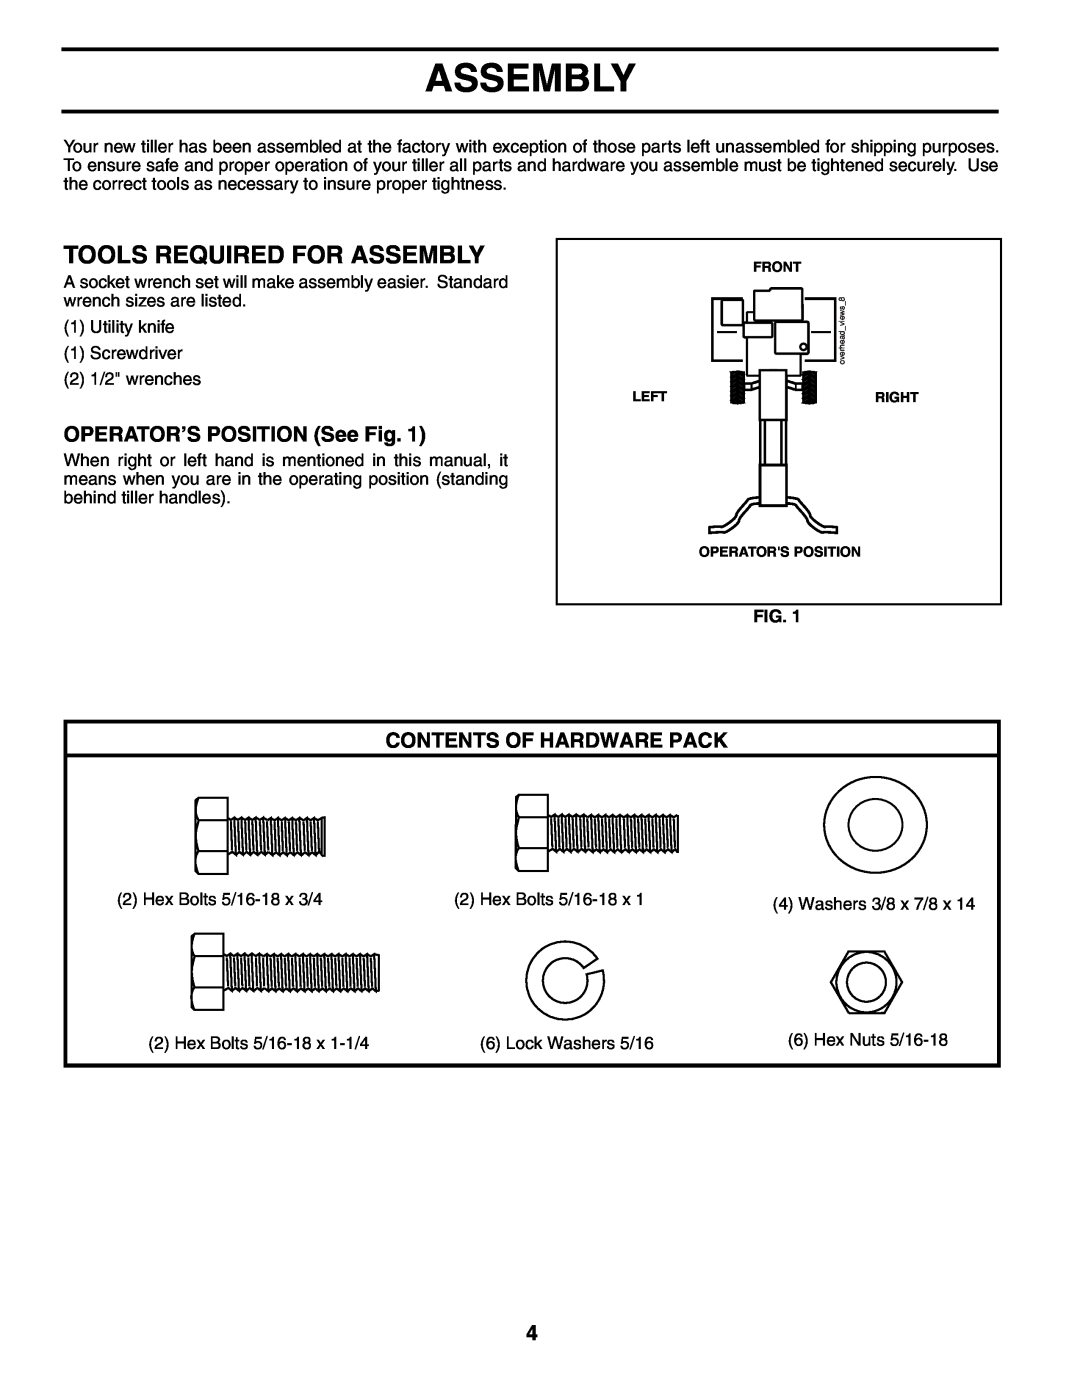 Poulan AGF550A owner manual Tools Required For Assembly, OPERATOR’S POSITION See Fig, Contents Of Hardware Pack 